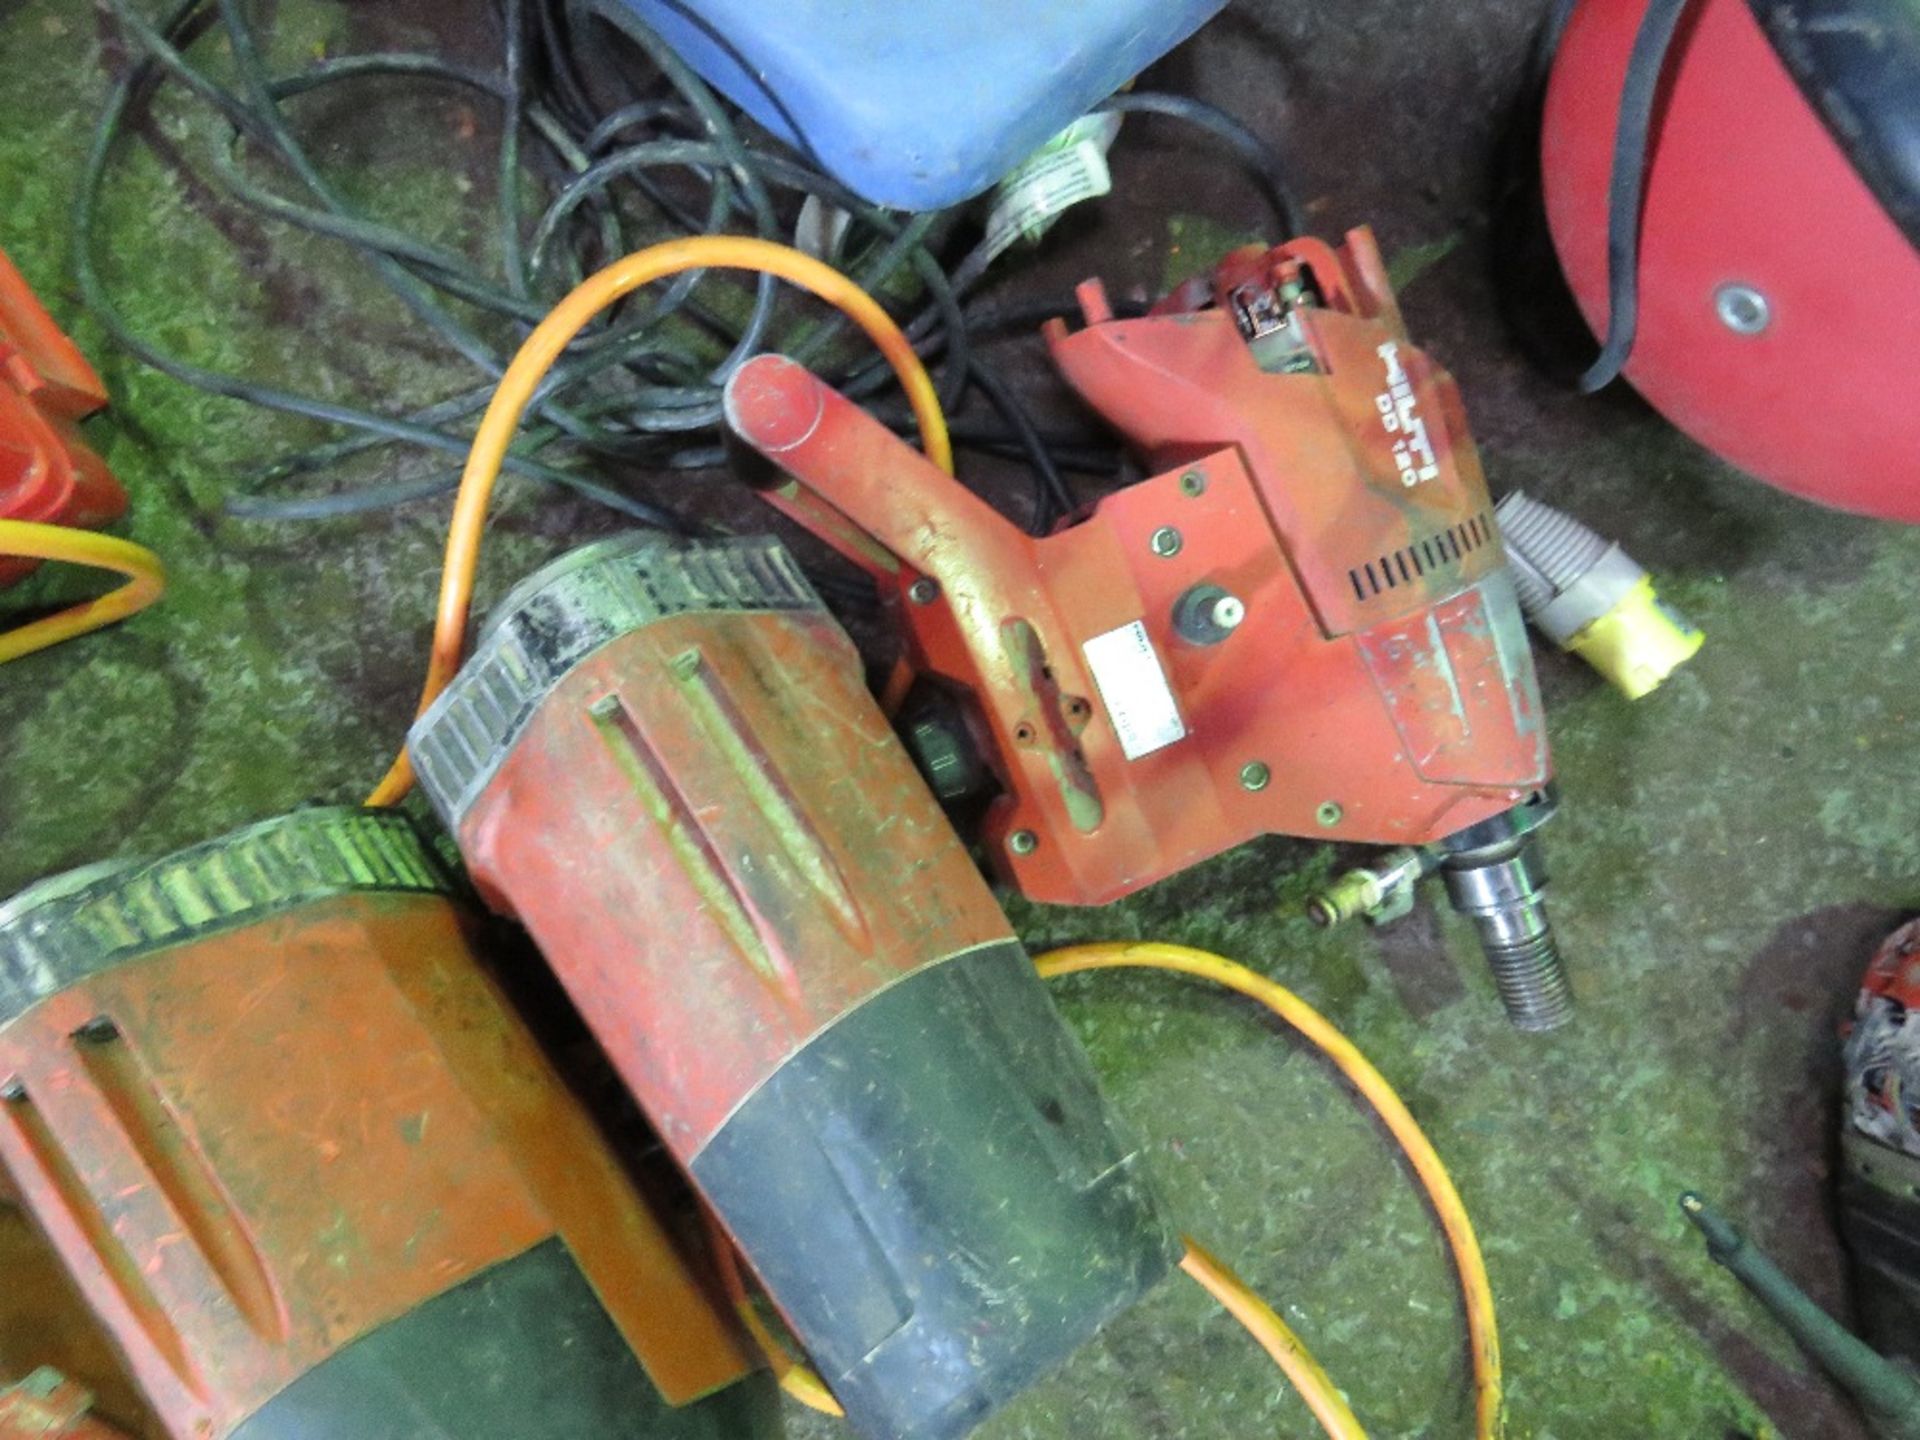 4 X HILTI DIAMOND DRILL HEADS FOR SPARES/REPAIR. - Image 2 of 4